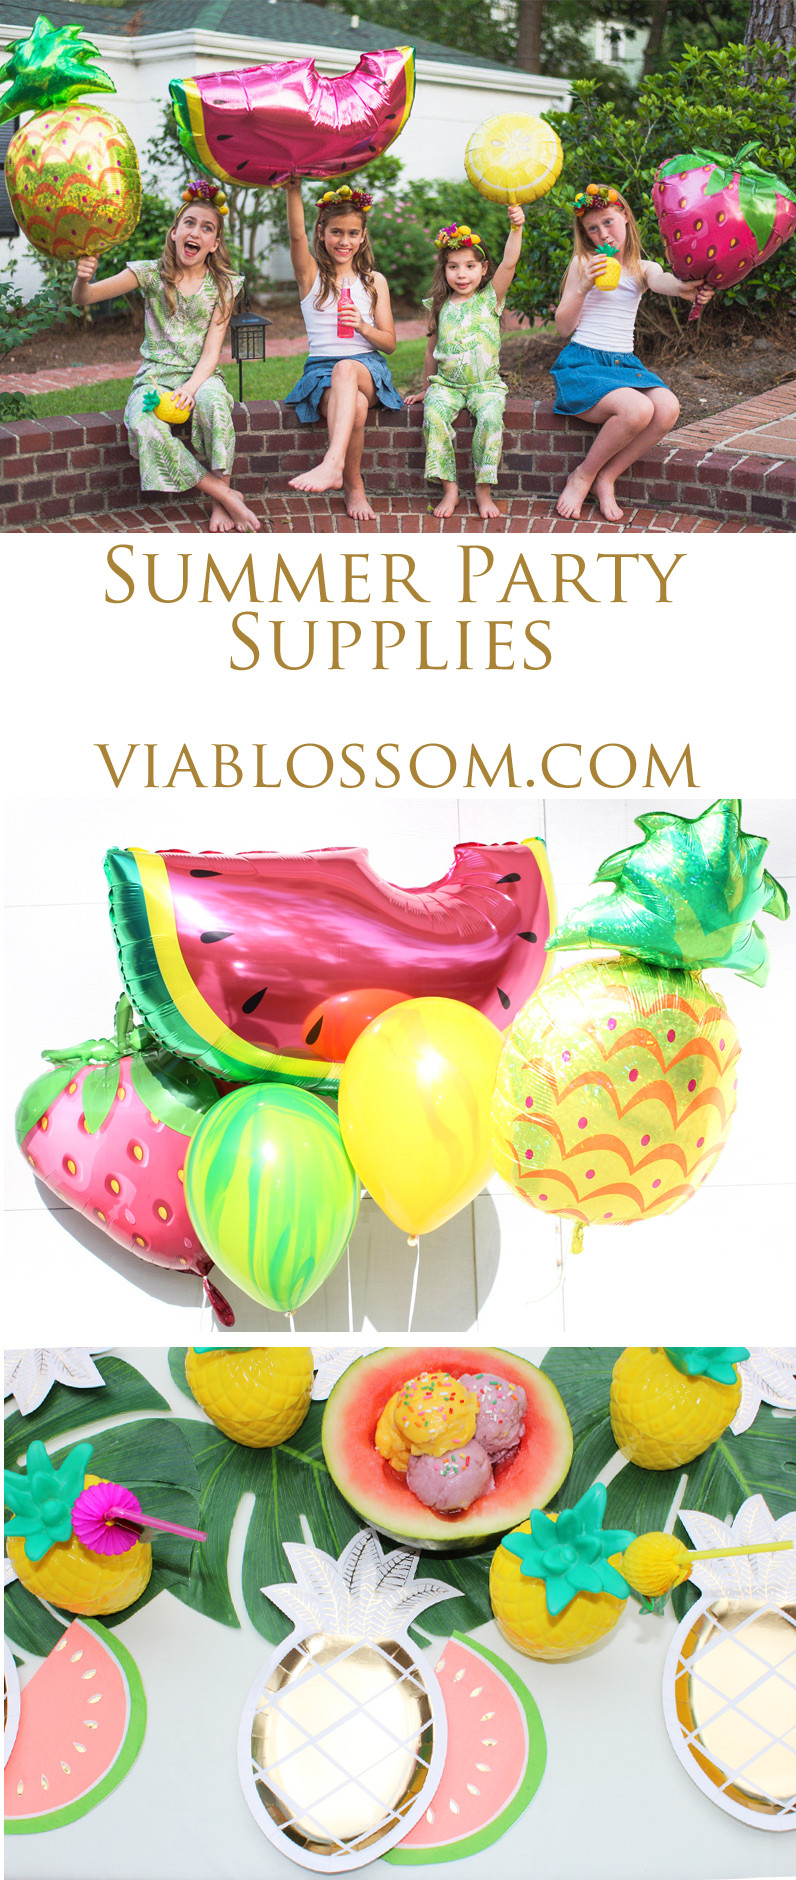 Summer Party Decoration Ideas
 Must Have Summer Party Supplies Via Blossom